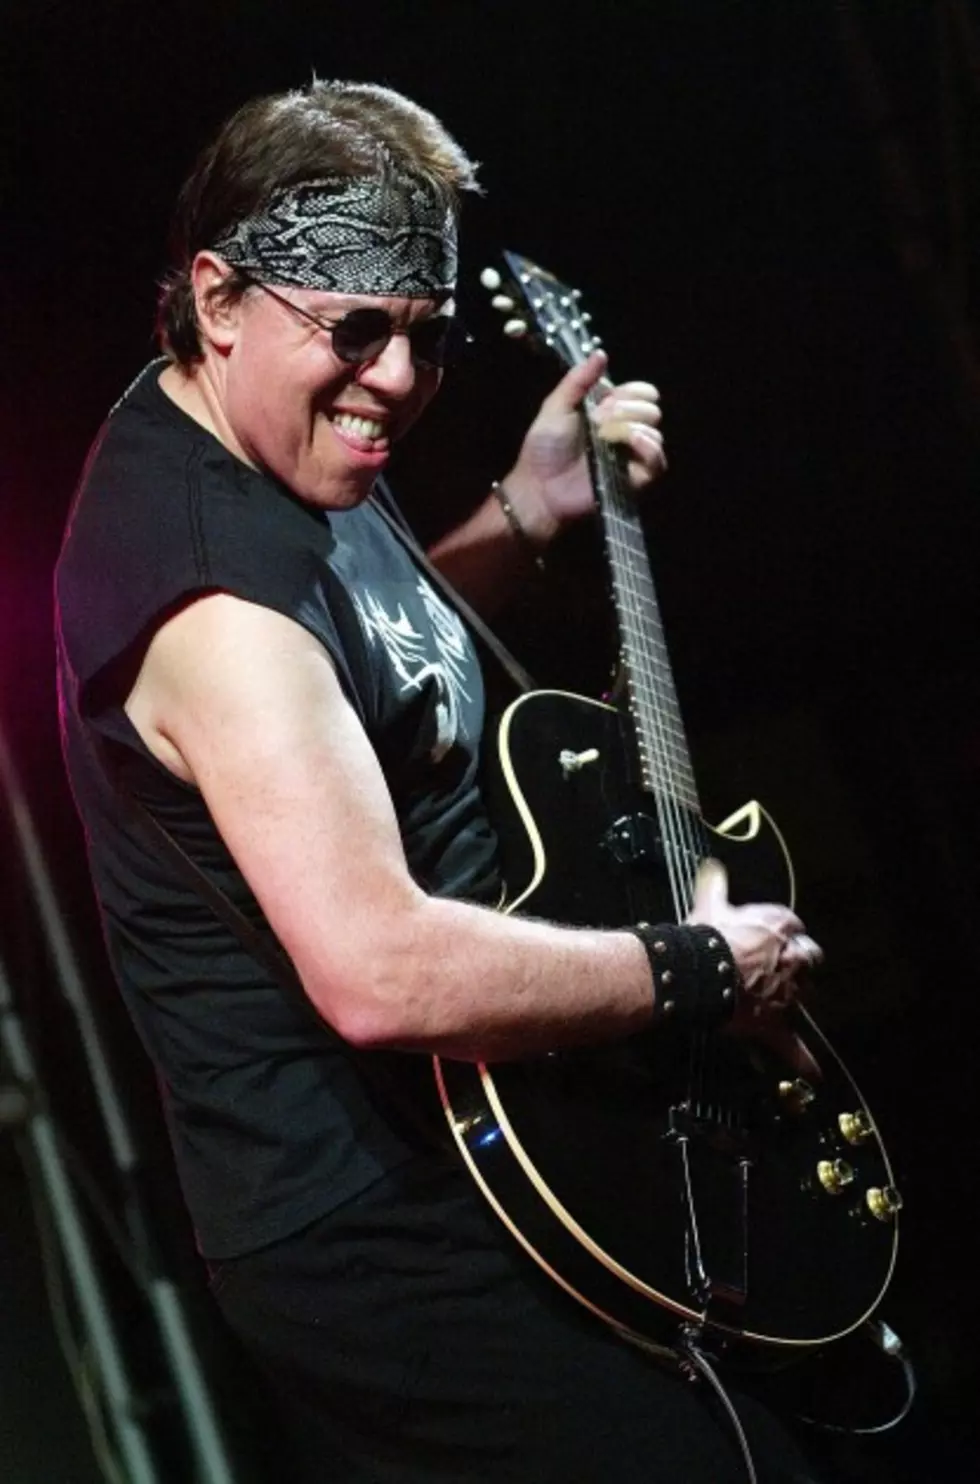 George Thorogood Tickets and Meet and Greet Up for Grabs On Friday